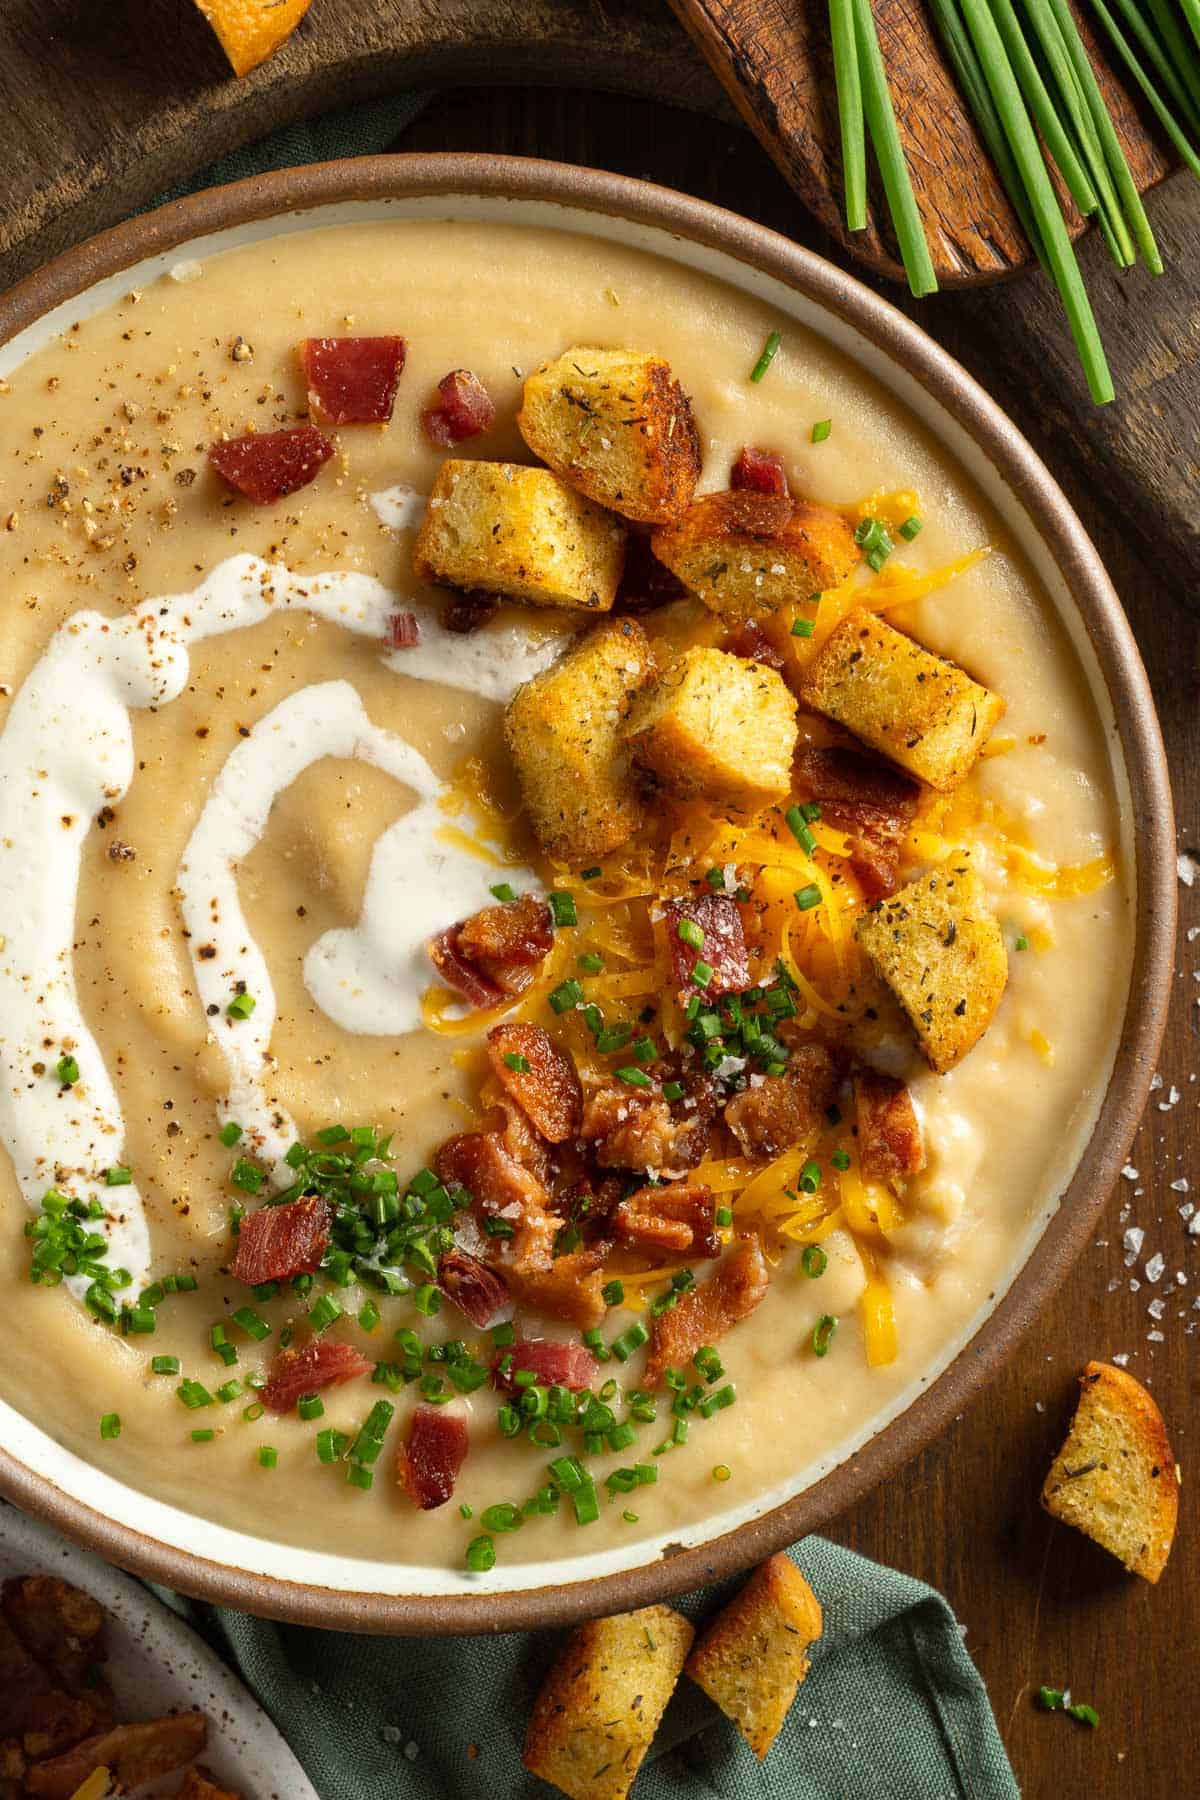 https://laurenfromscratch.com/wp-content/uploads/2023/01/An-up-close-bowl-of-potato-soup-topped-with-bacon-cream-chives-and-croutons..jpg